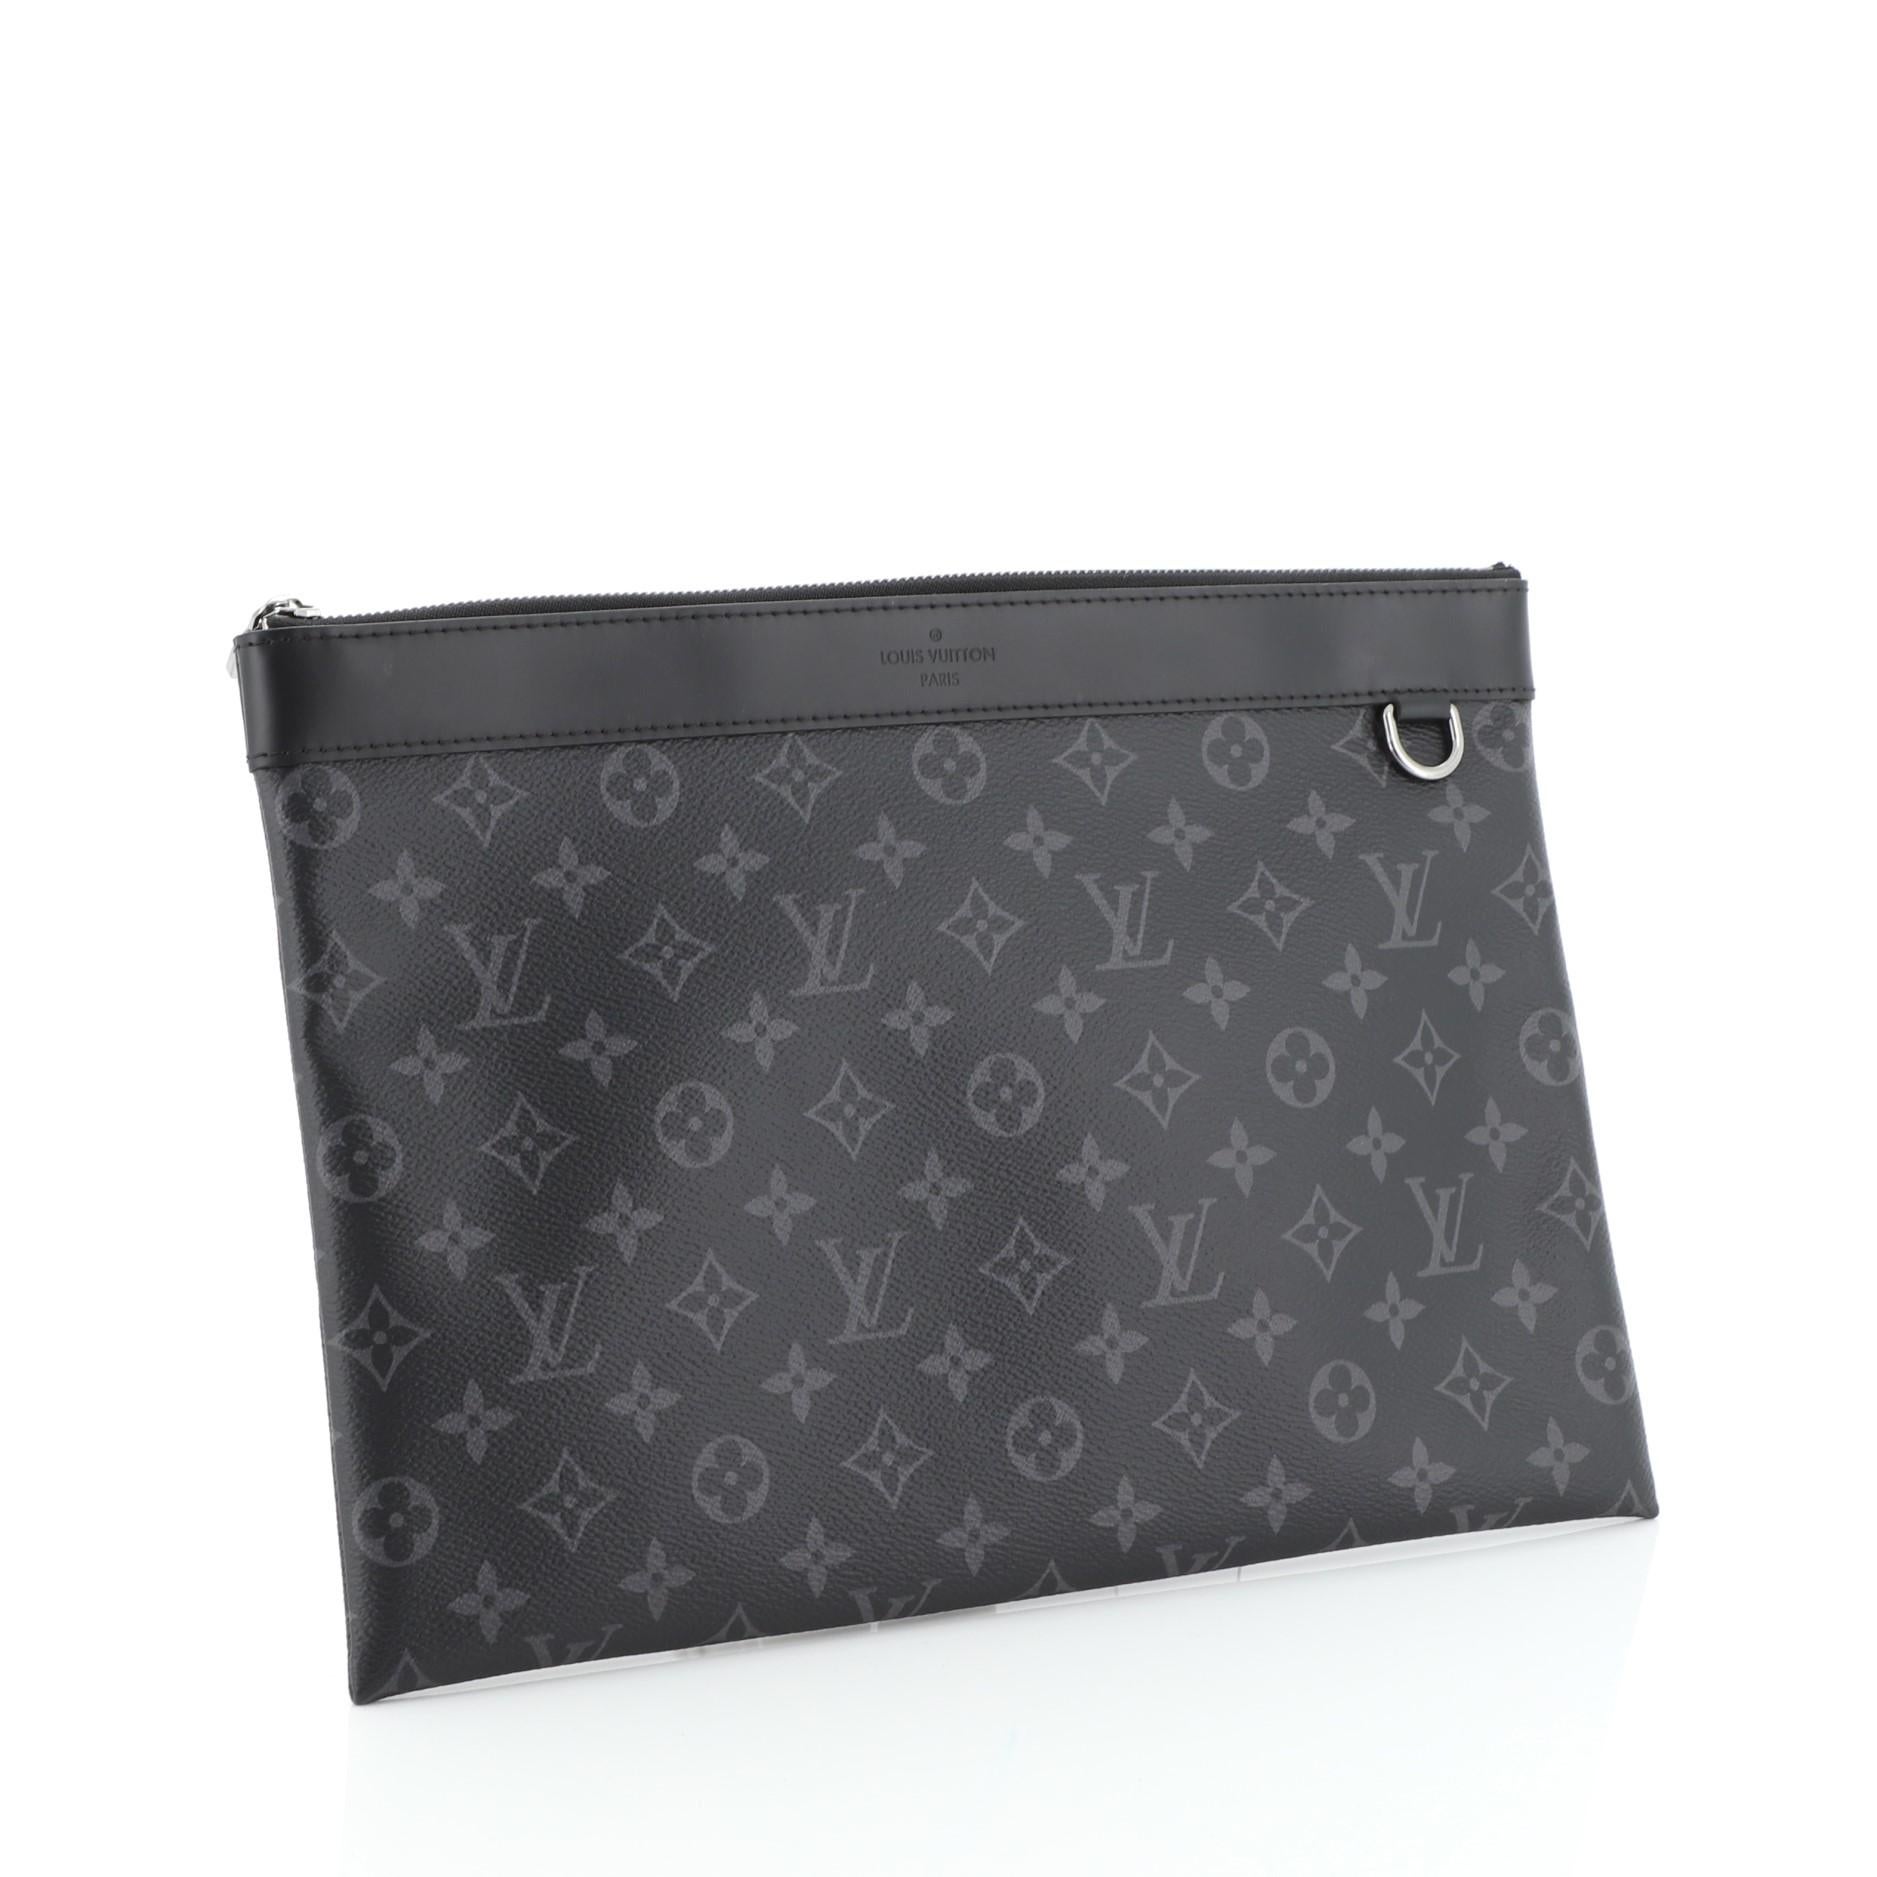 This Louis Vuitton Discovery Pochette Monogram Eclipse Canvas GM, crafted from black monogram eclipse coated canvas, features gunmetal-tone hardware. Its zip closure opens to a black fabric interior with slip pocket. Authenticity code reads: TN3198.